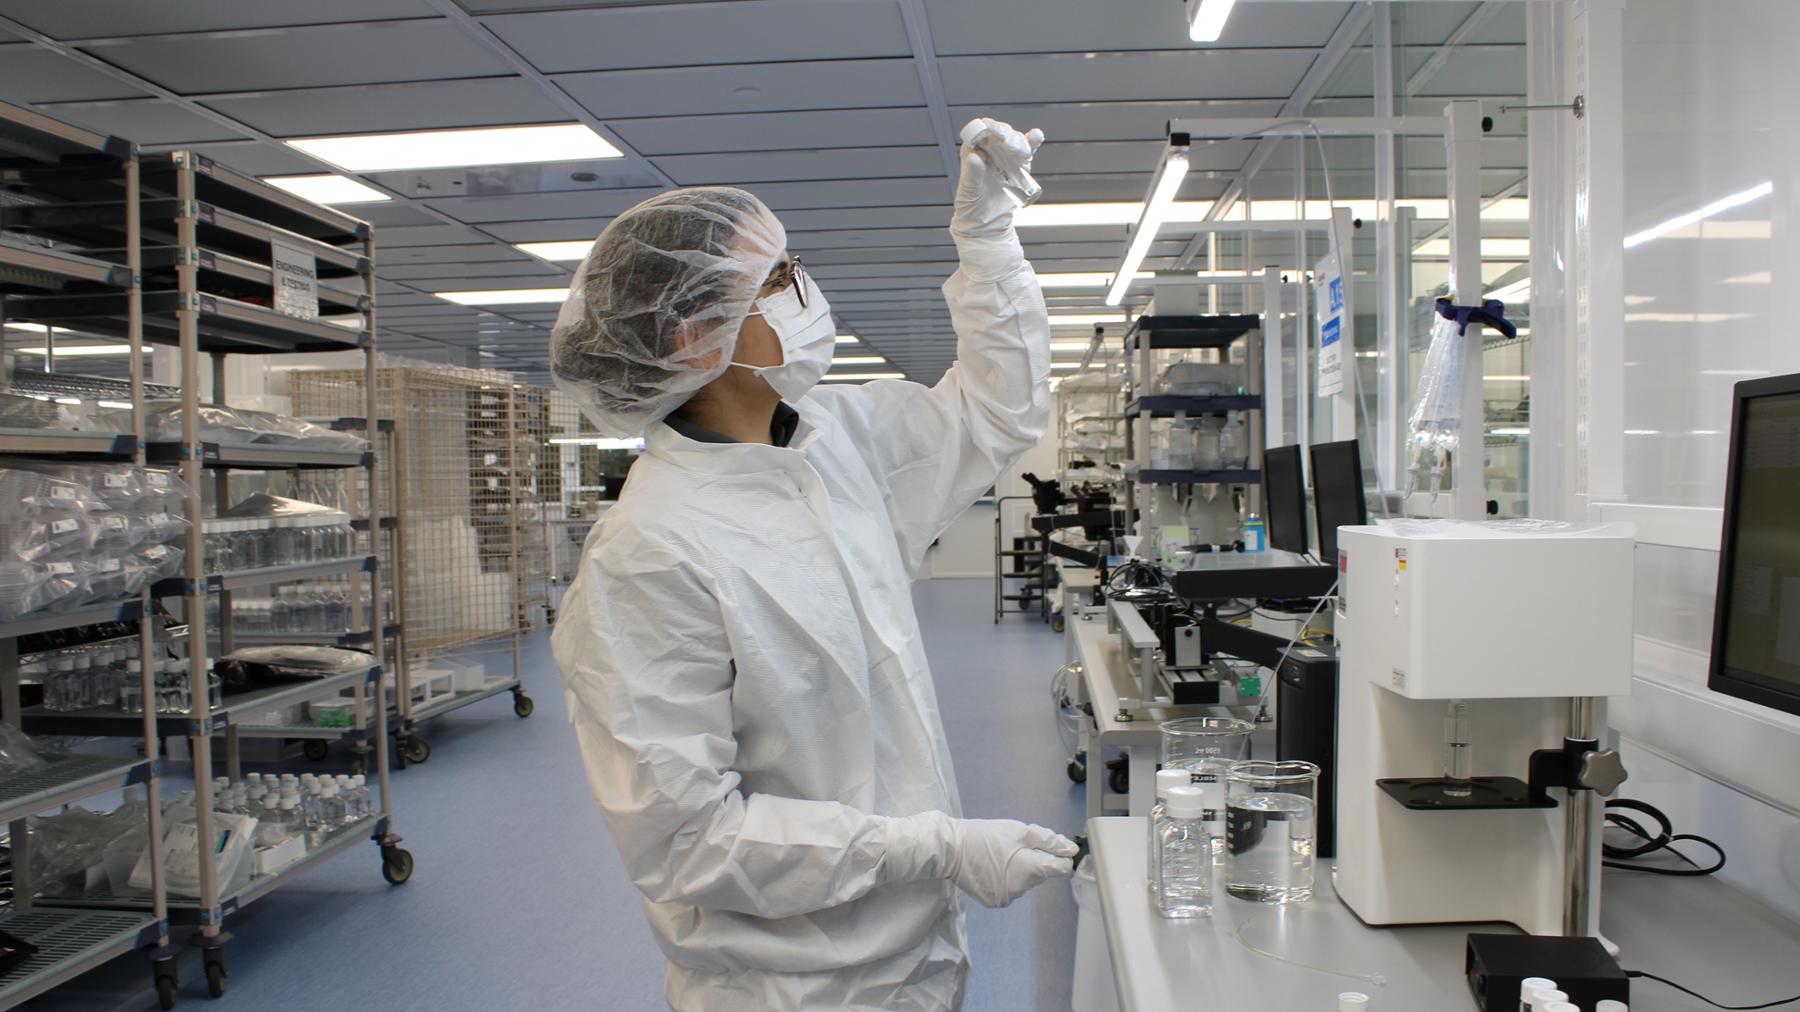 Mariana Latta Suazo, a UVic co-op student, is working in a lab, wearing a protective lab coat, hairnet, gloves, face mask and glasses. Mariana is holding up a small vial to examine its contents.